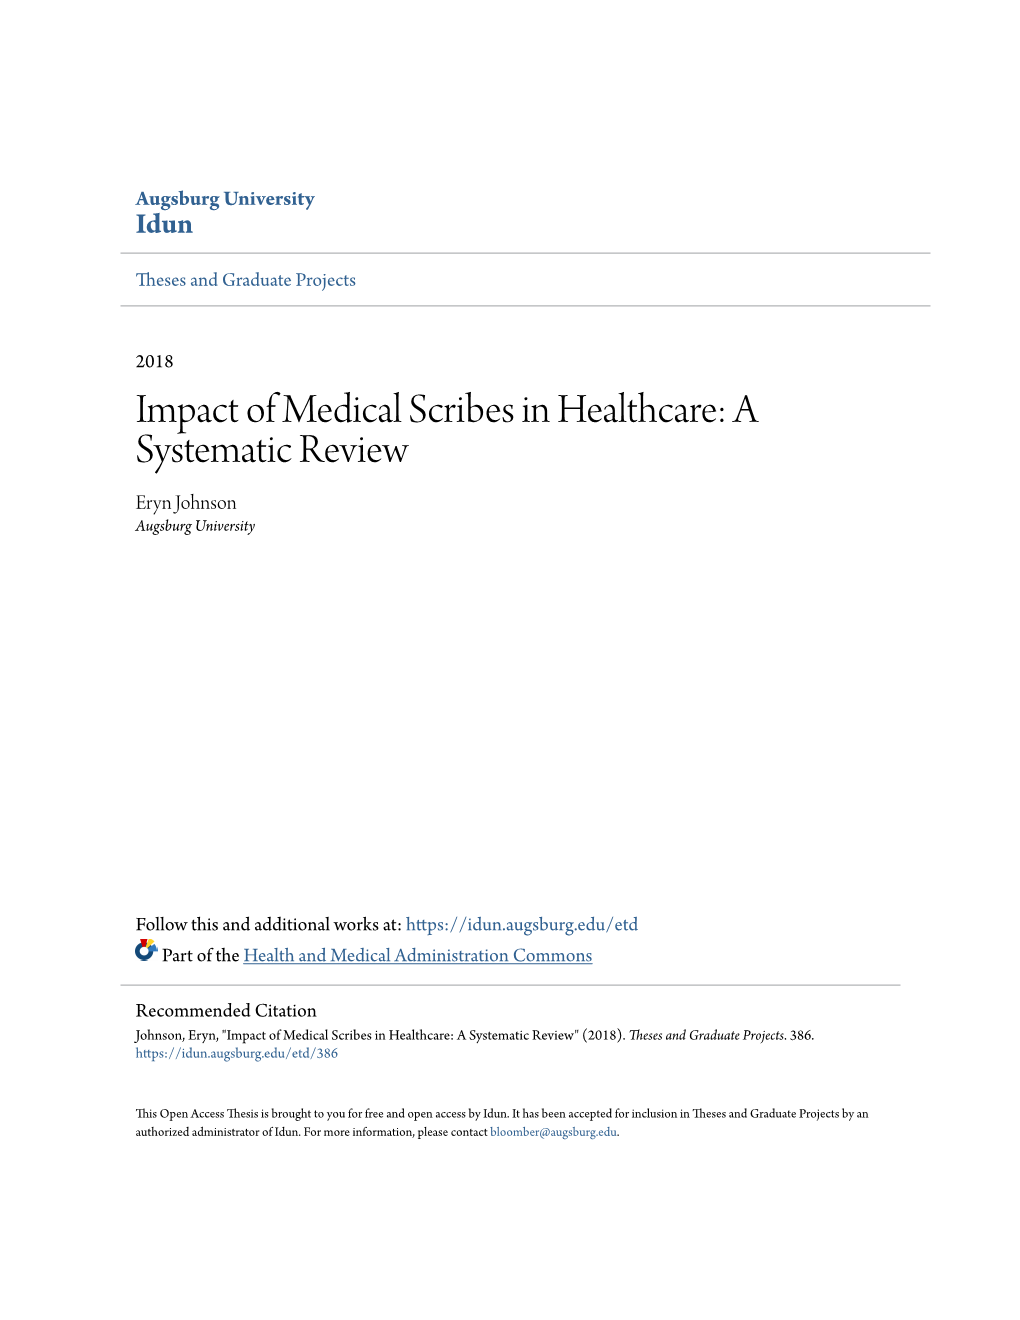 Impact of Medical Scribes in Healthcare: a Systematic Review Eryn Johnson Augsburg University